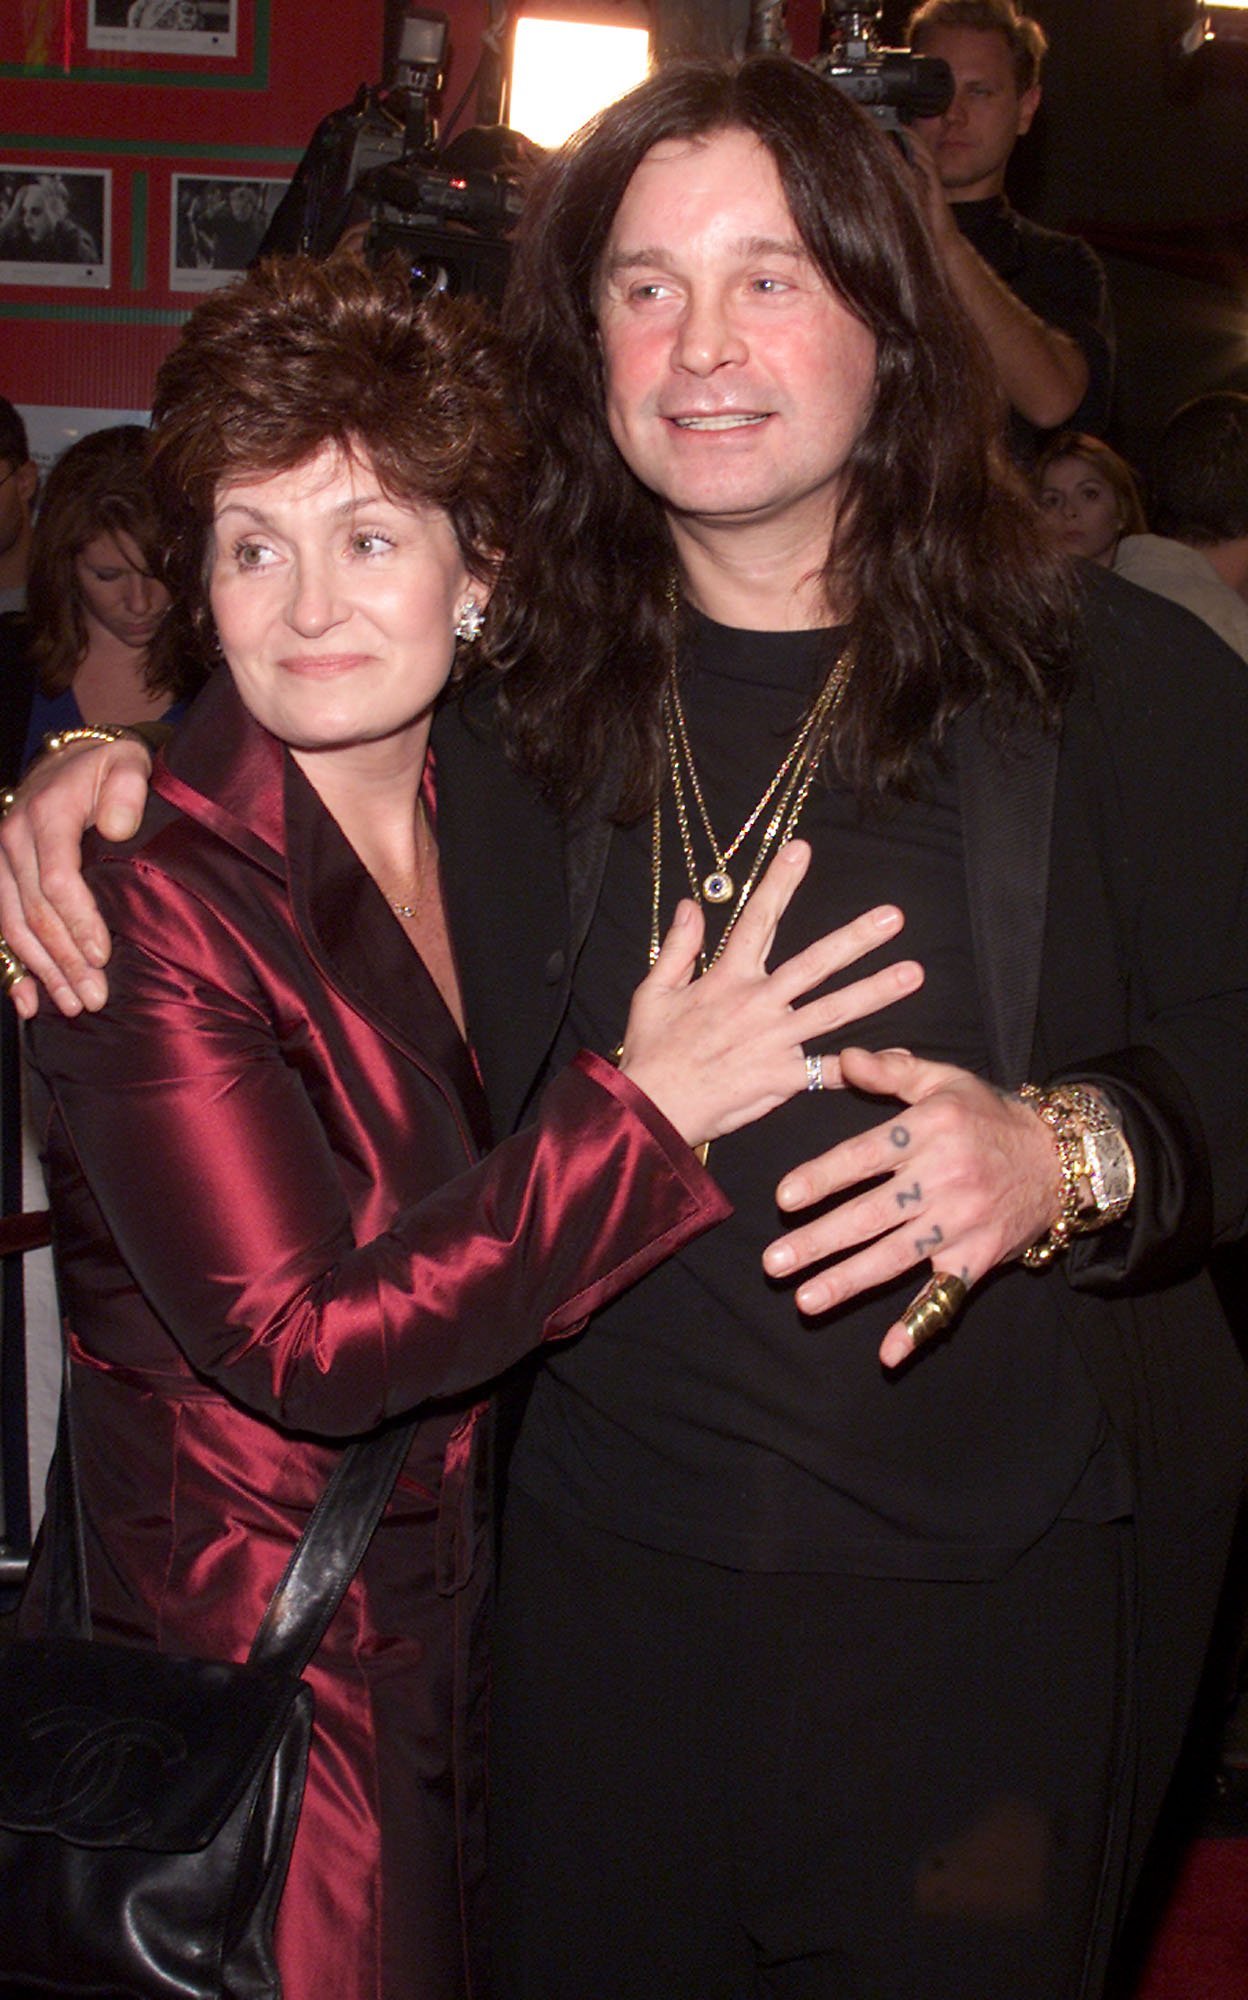 Ozzy Osbourne and his wife Sharon at the premiere of 'Little Nicky' at the Chinese Theater on February 11, 2000. | Photo: Getty Images.